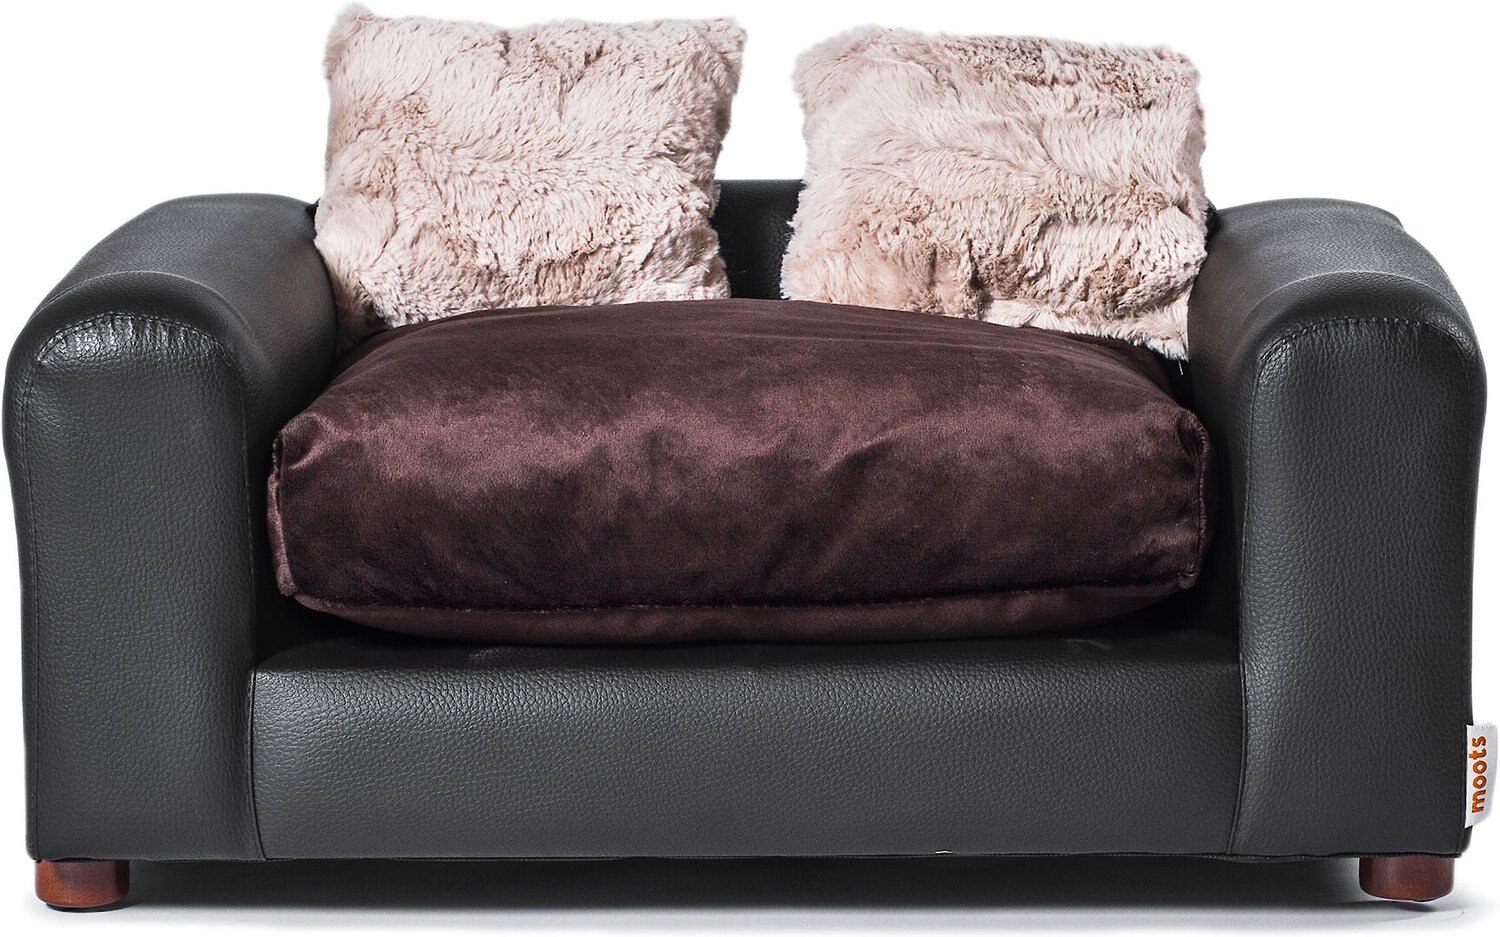 Moots Premium Leatherette Sofa Cat, Leather Dog Couch Bed